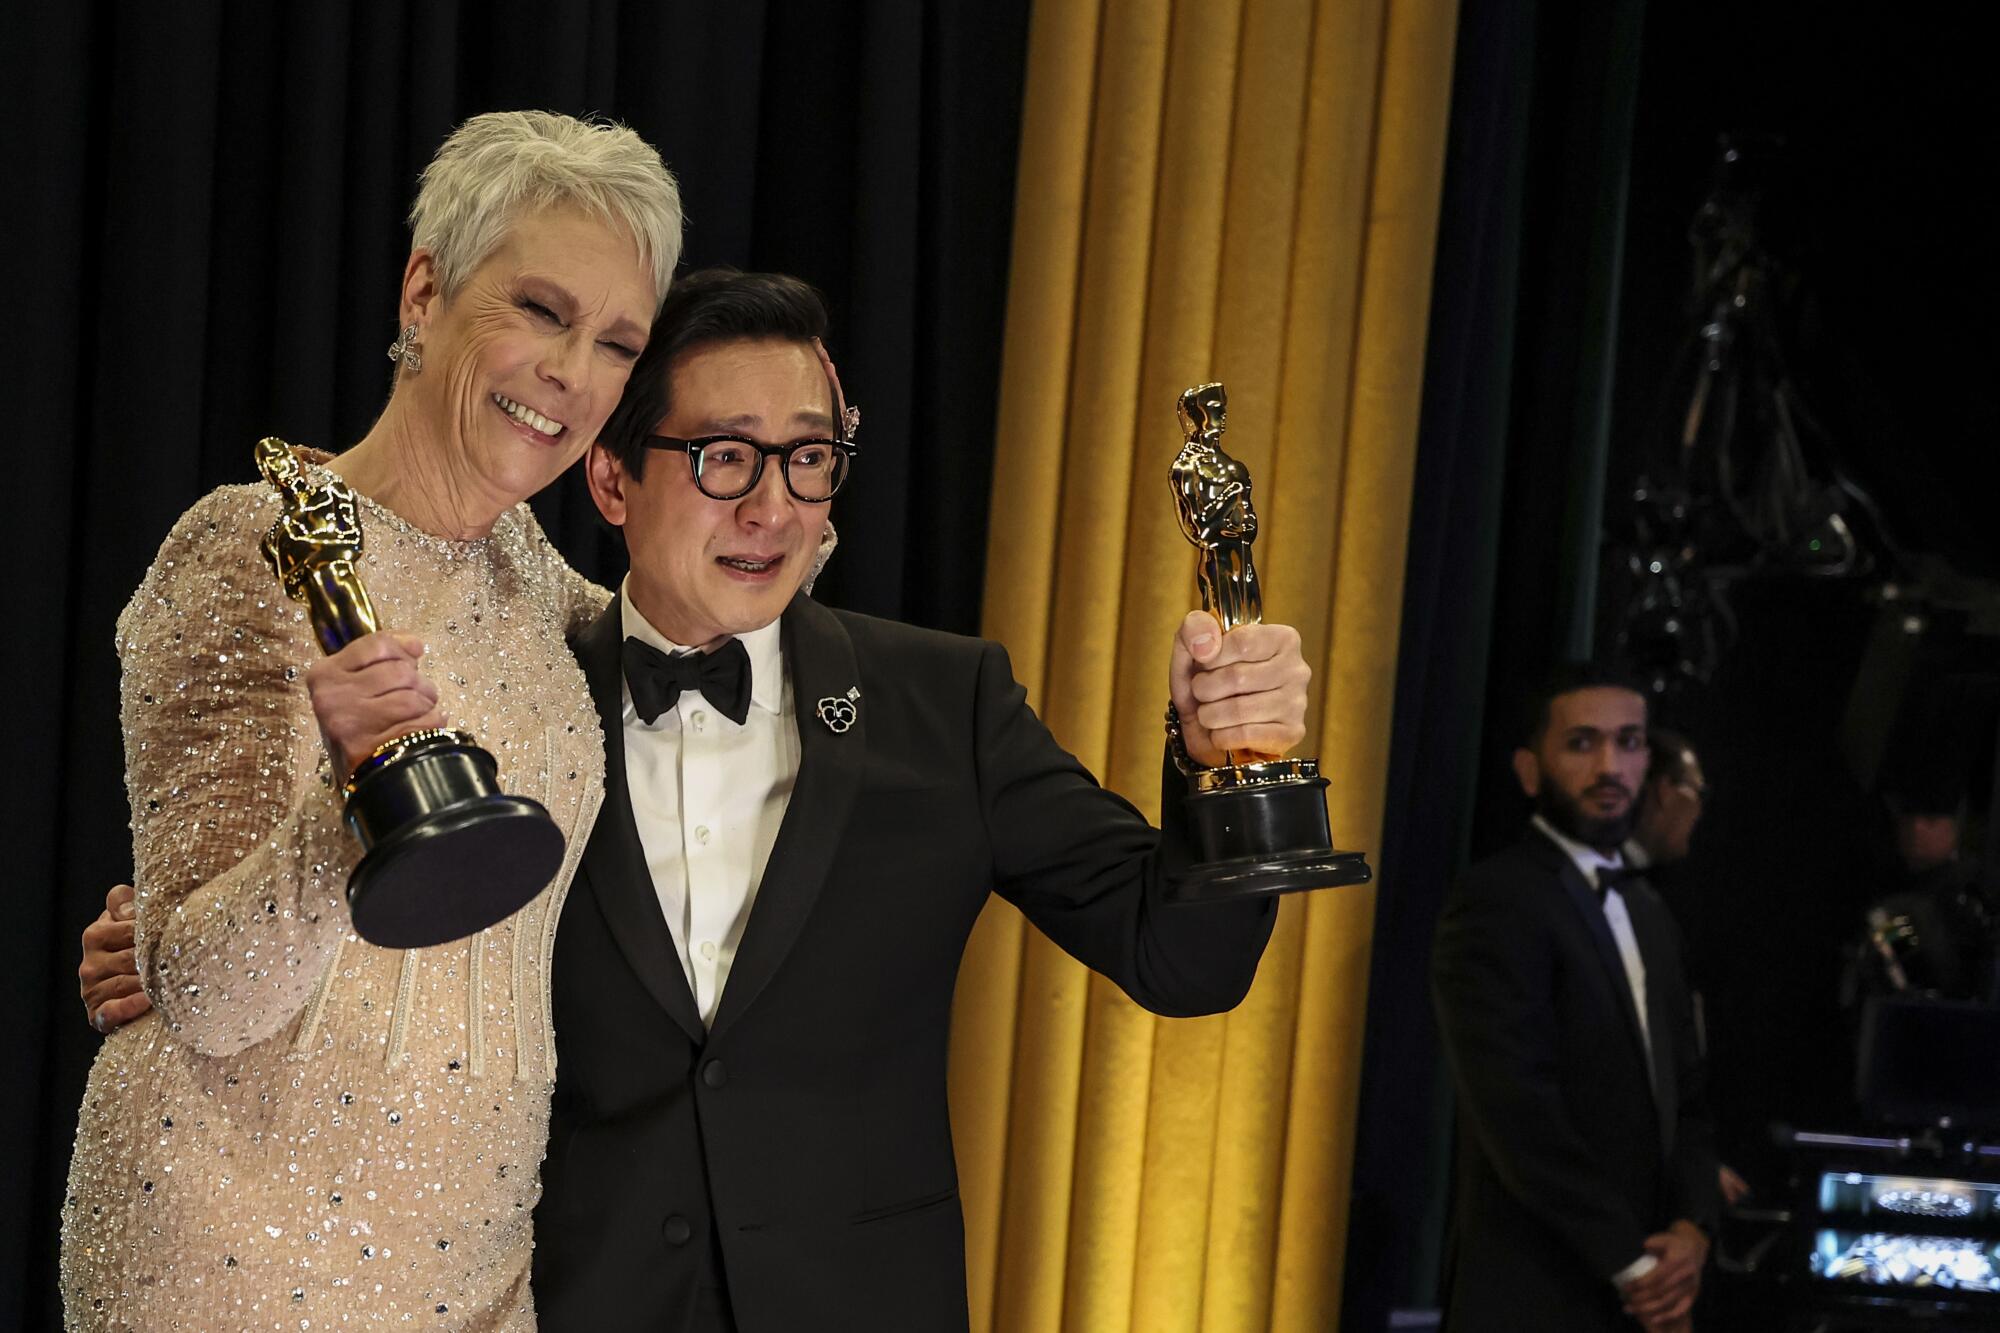 A woman in a champagne-colored dress and man in a tux both hold up Oscars backstage.